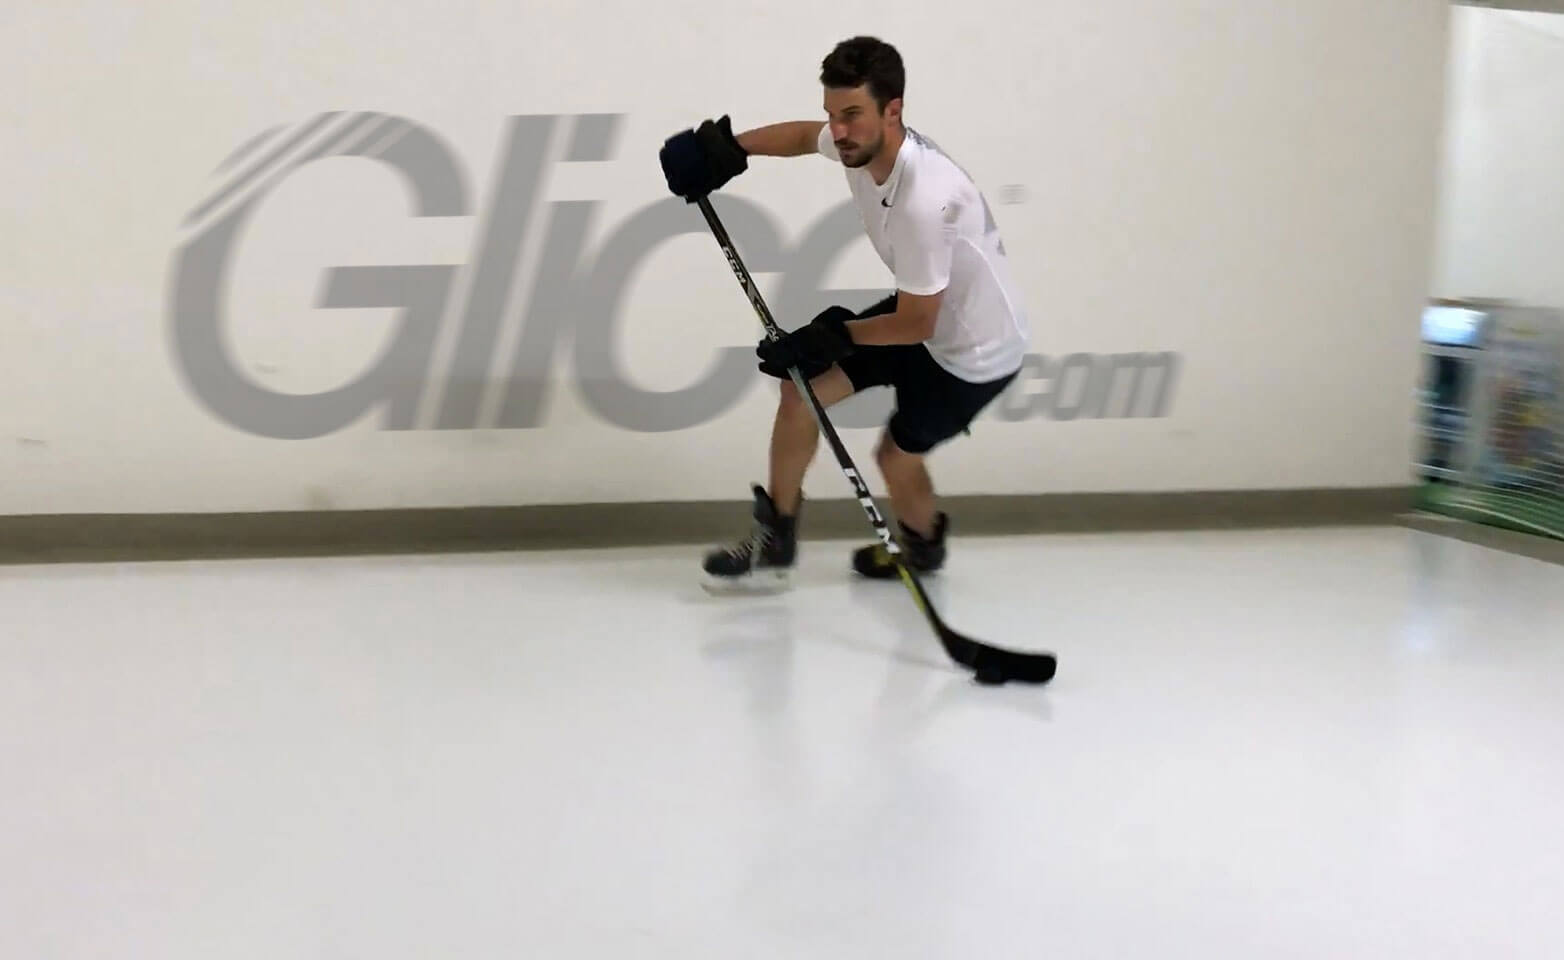 NHL Star Roman Josi practicing on synthetic ice rink